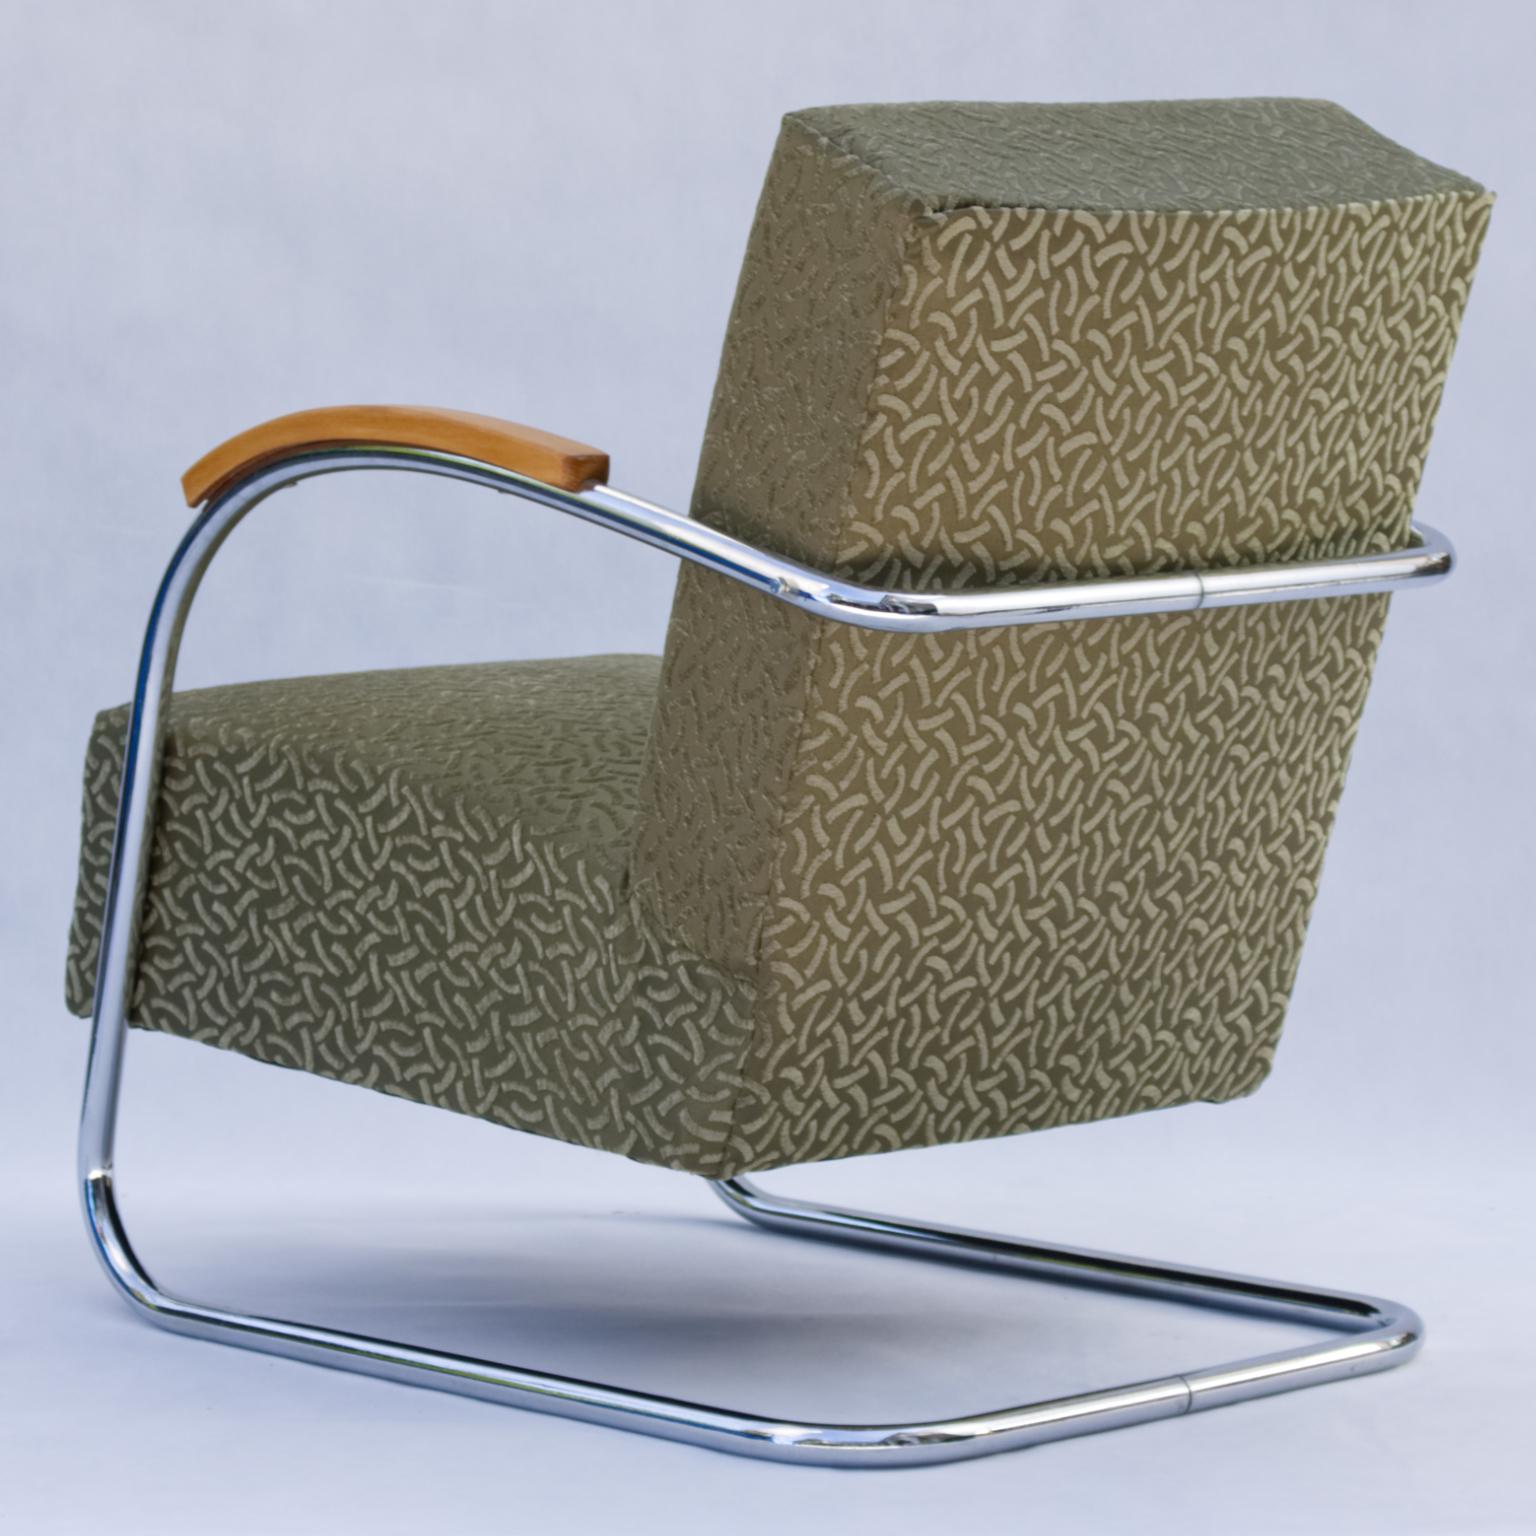 Tubular Steel Cantilever Armchair Fn 21 by Mücke & Melder, circa 1930 In Good Condition For Sale In Lucenec, SK